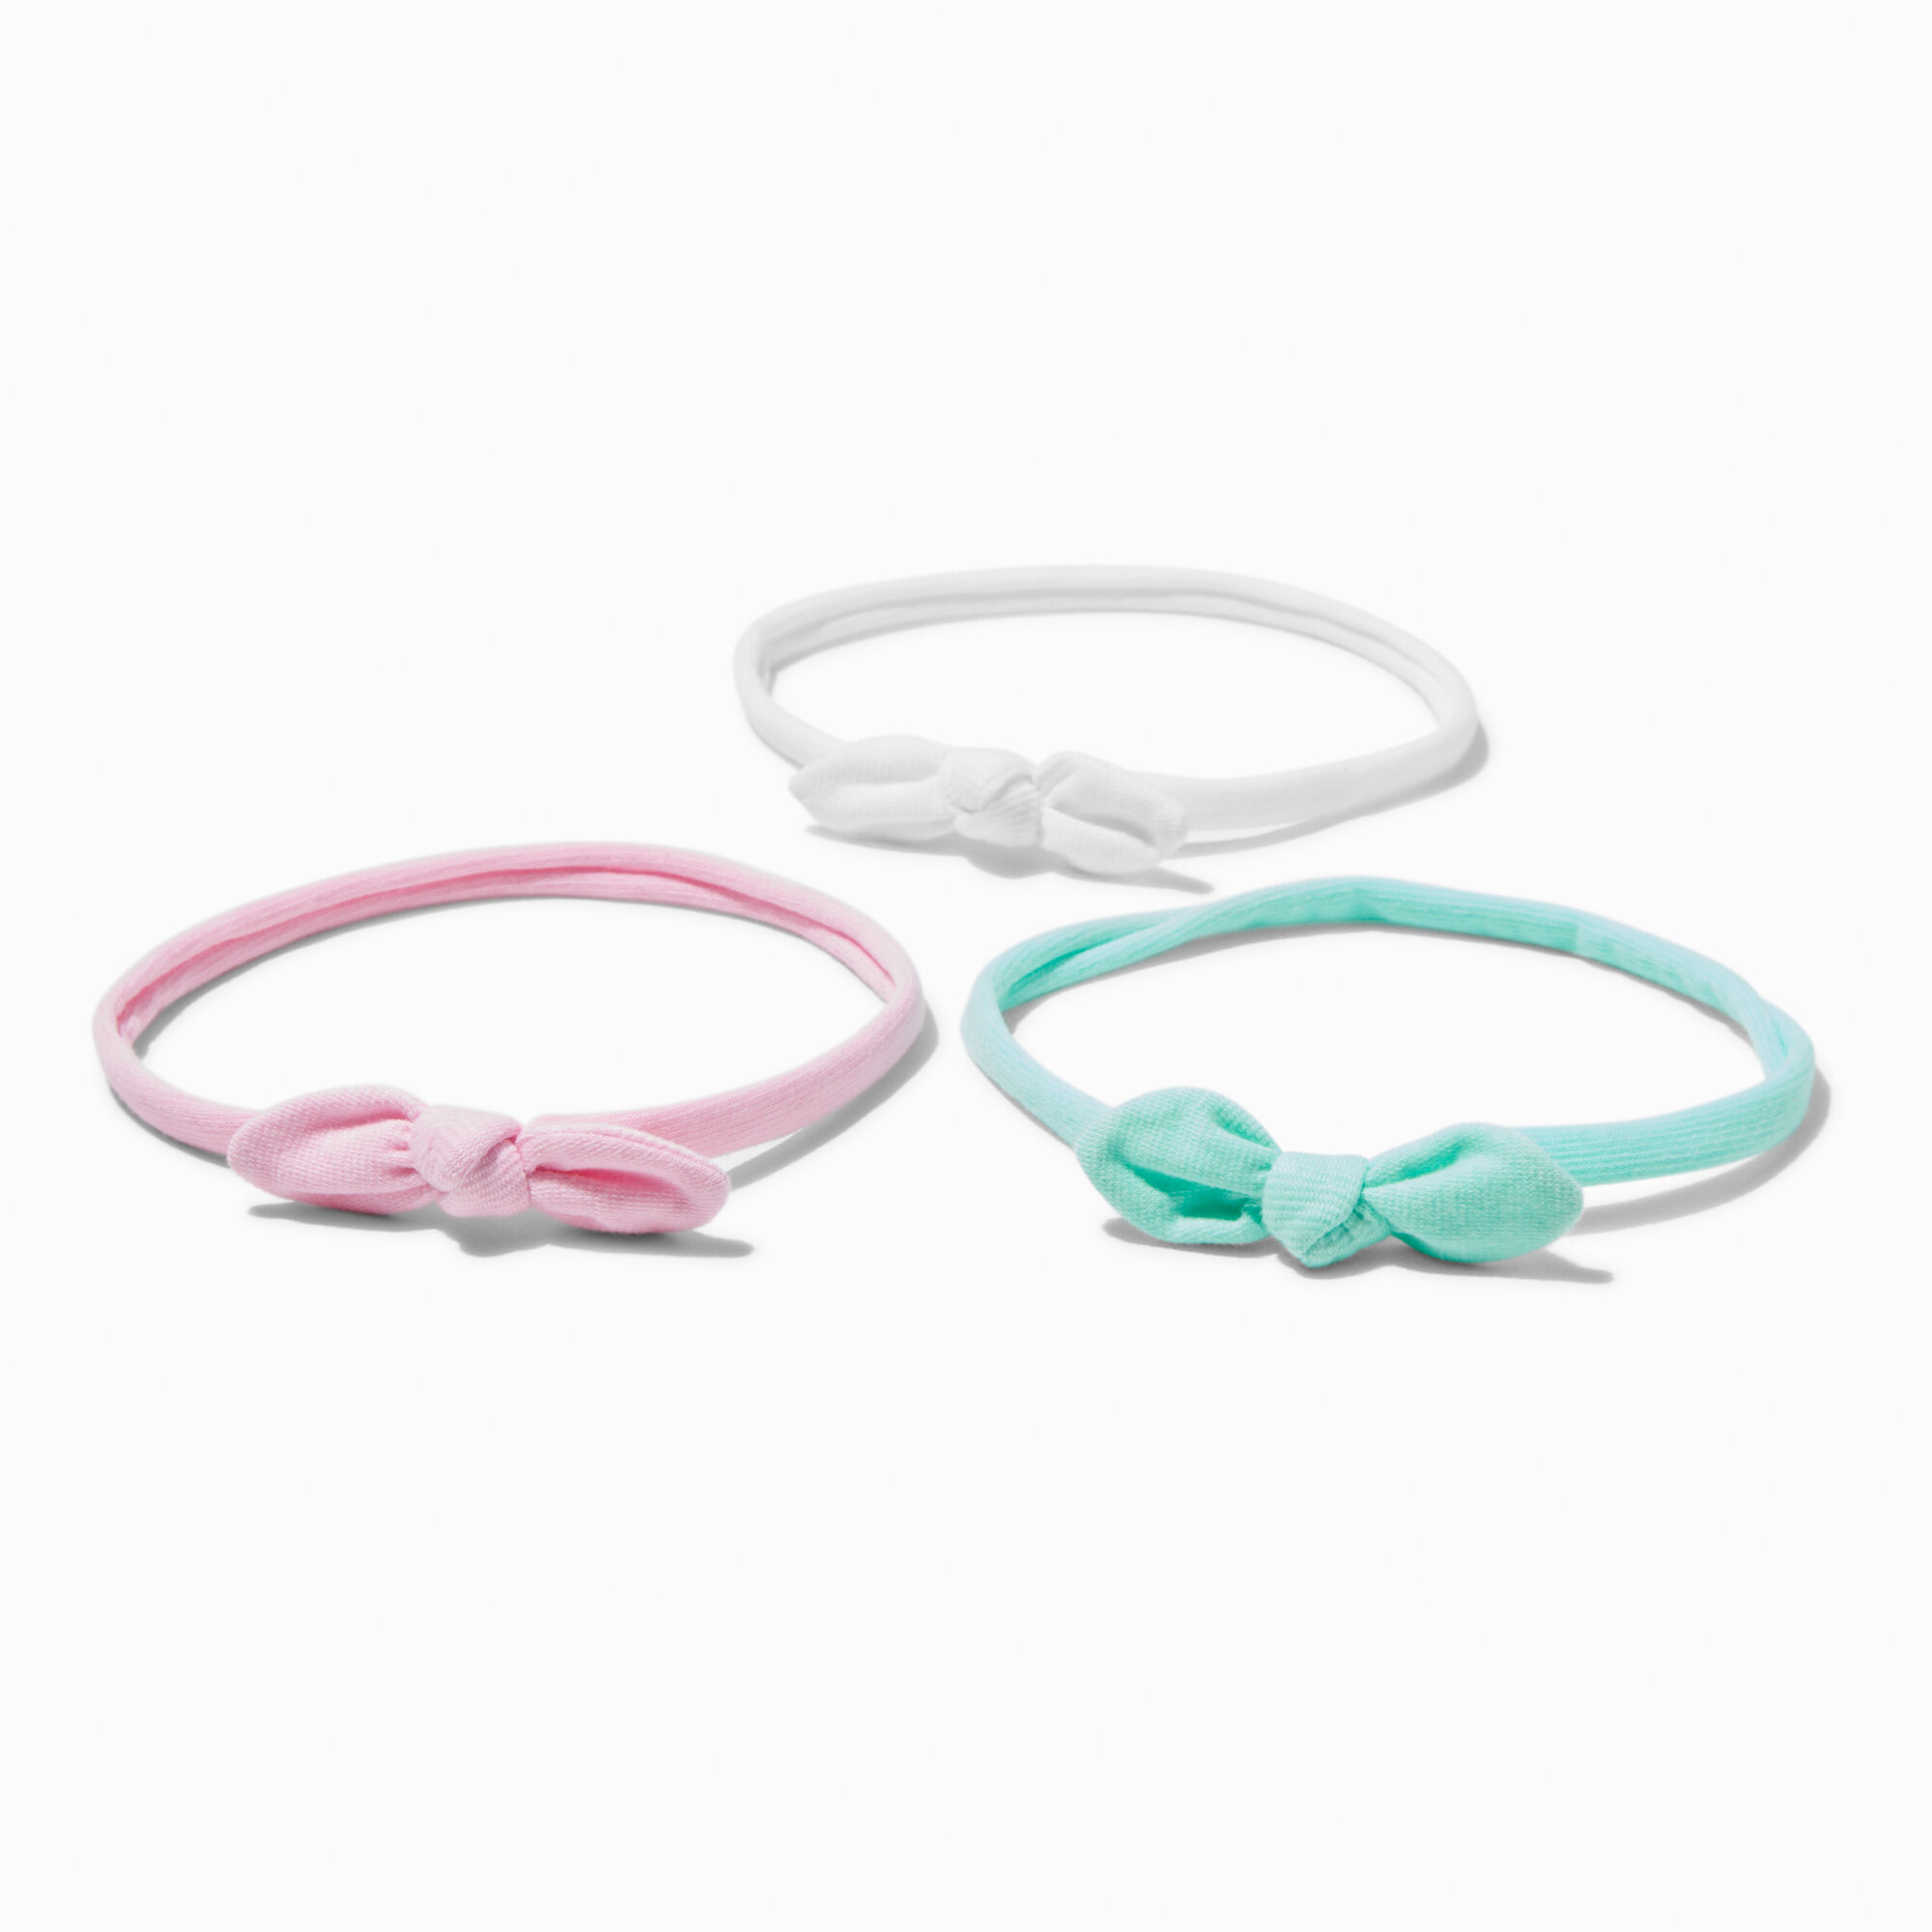 View Claires Club Pastel Bow Headwraps 3 Pack information